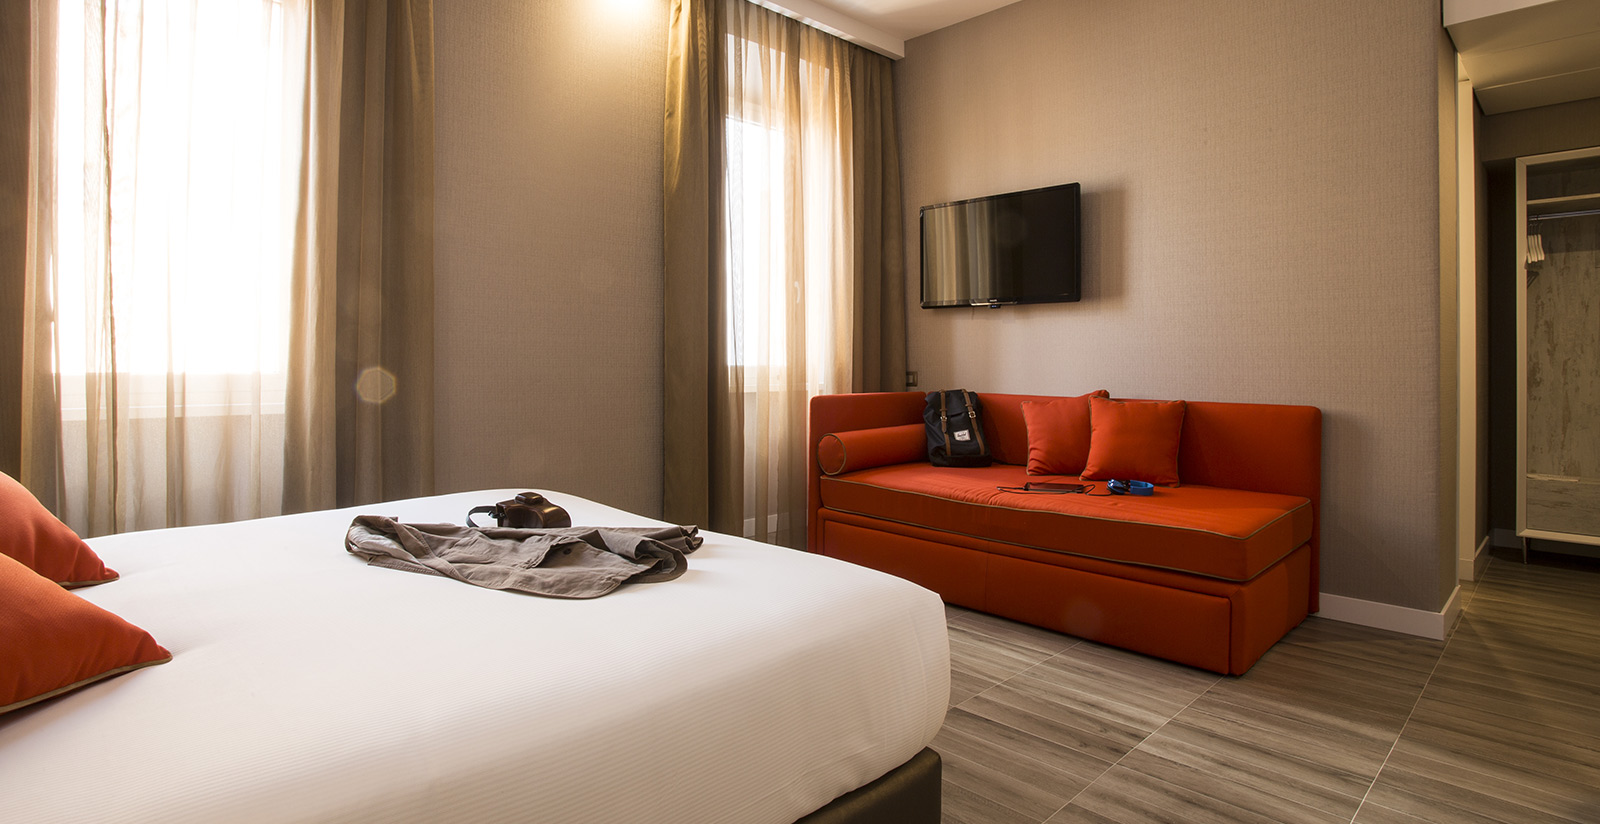 Smooth Hotel Rome – The Rooms – Sleep in Rome near the Station